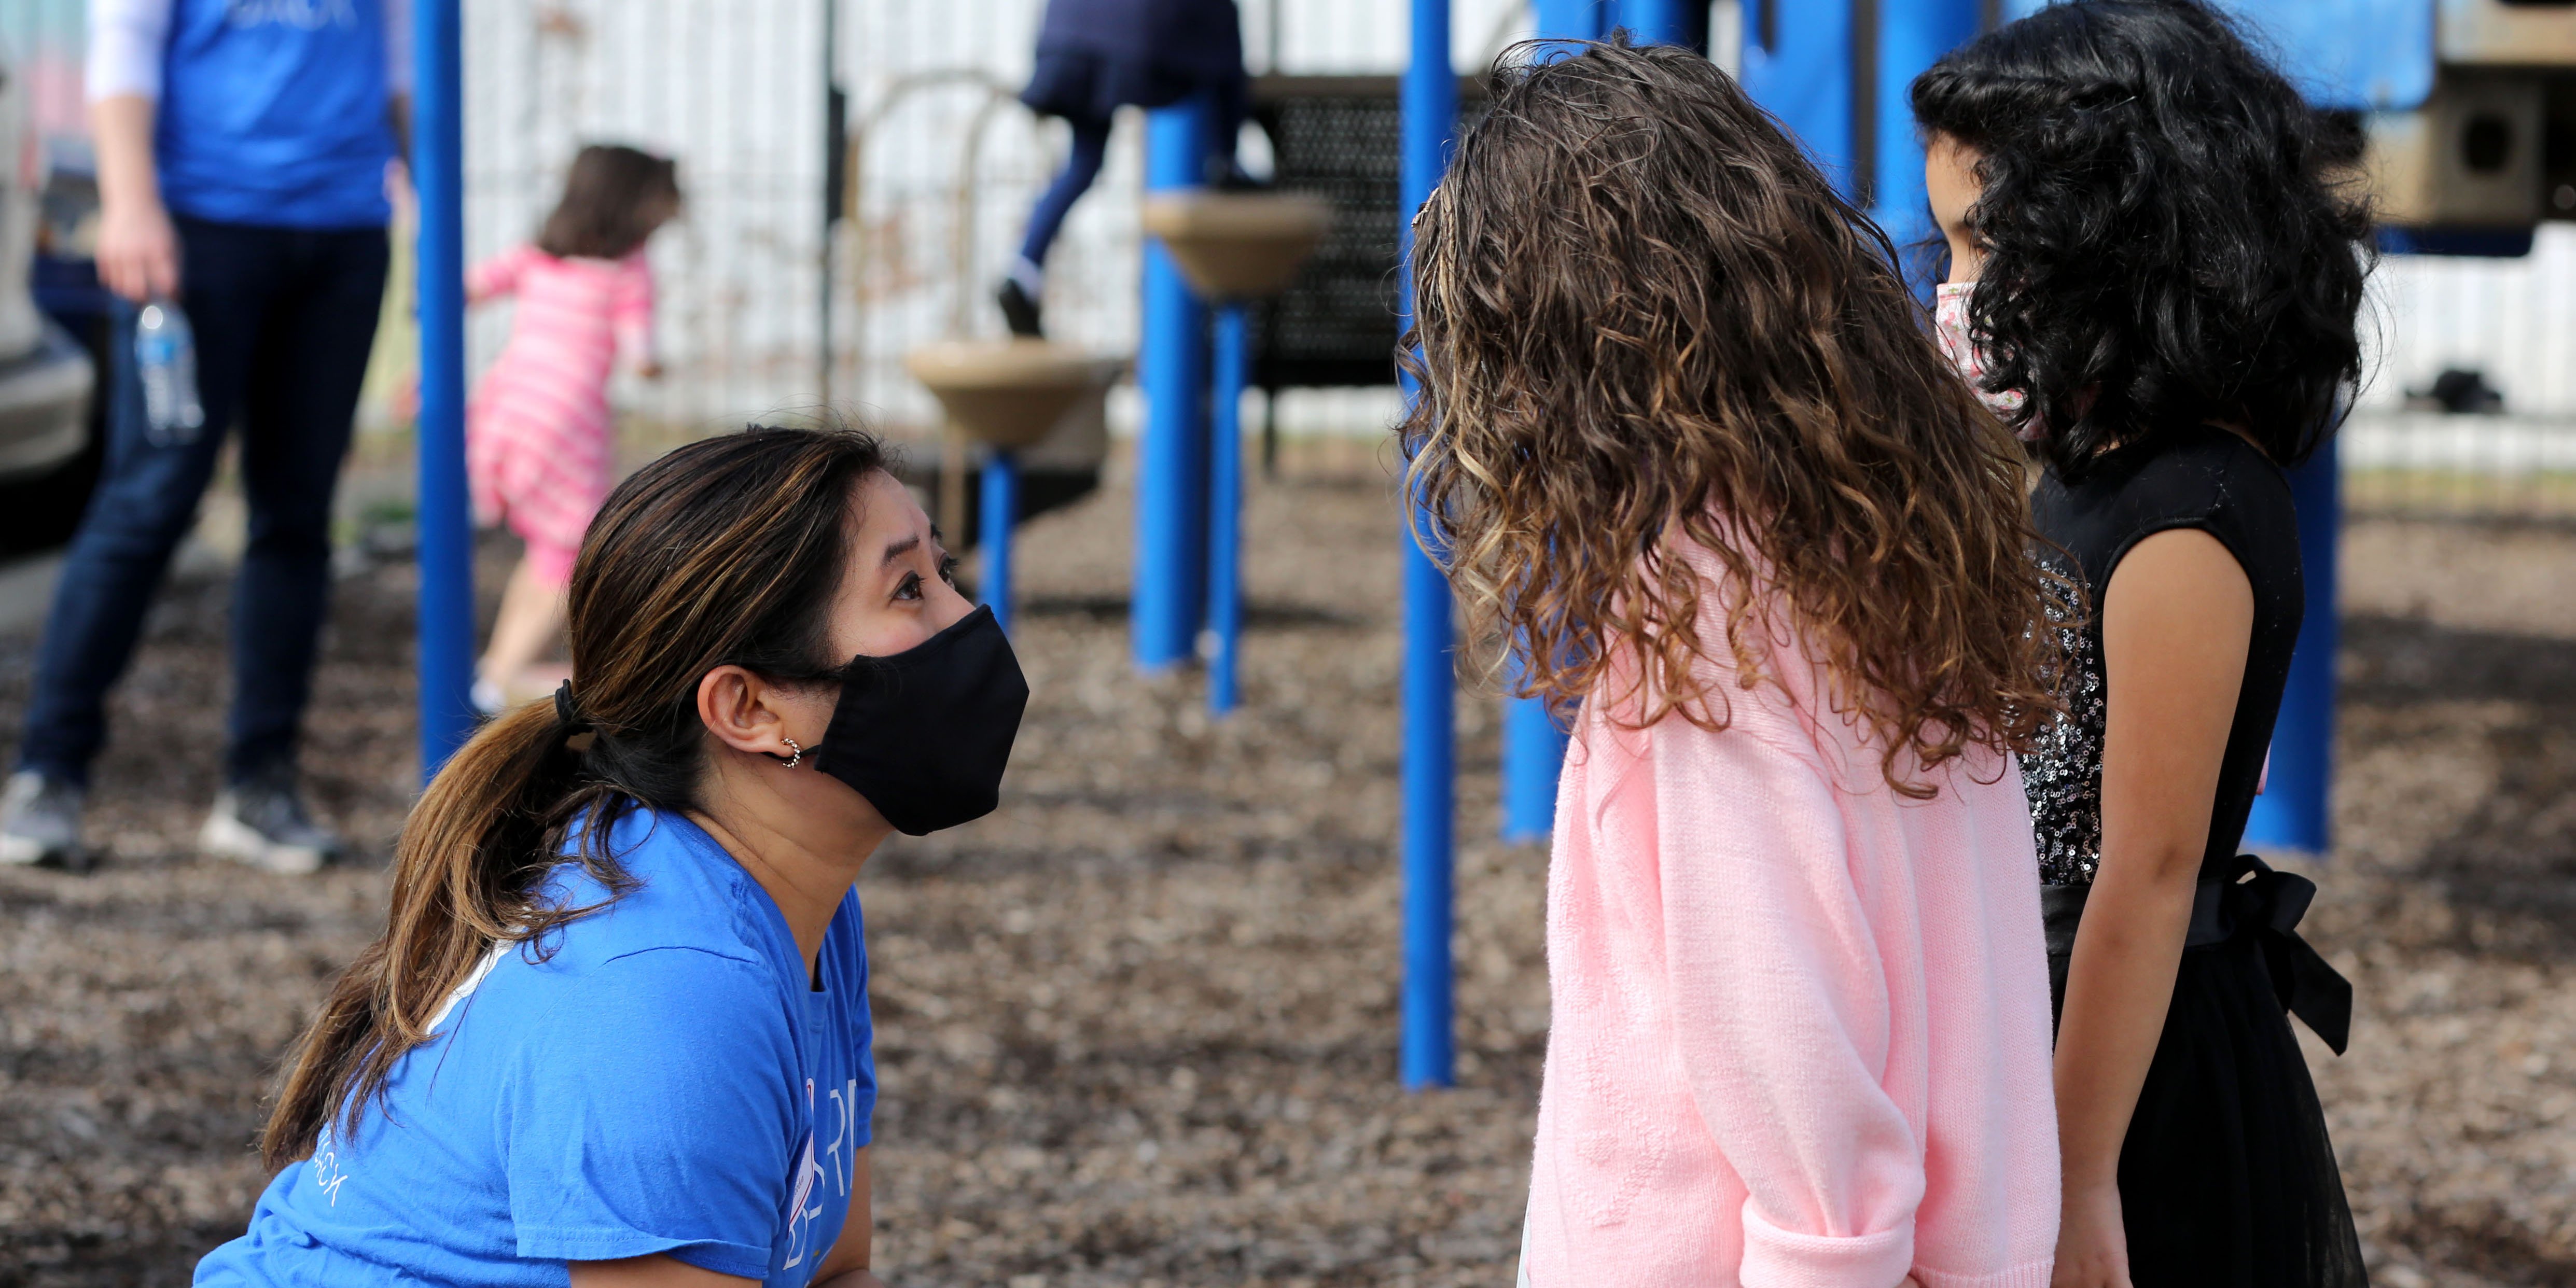 Baird Capital associate talking to children on a playground while volunteering.